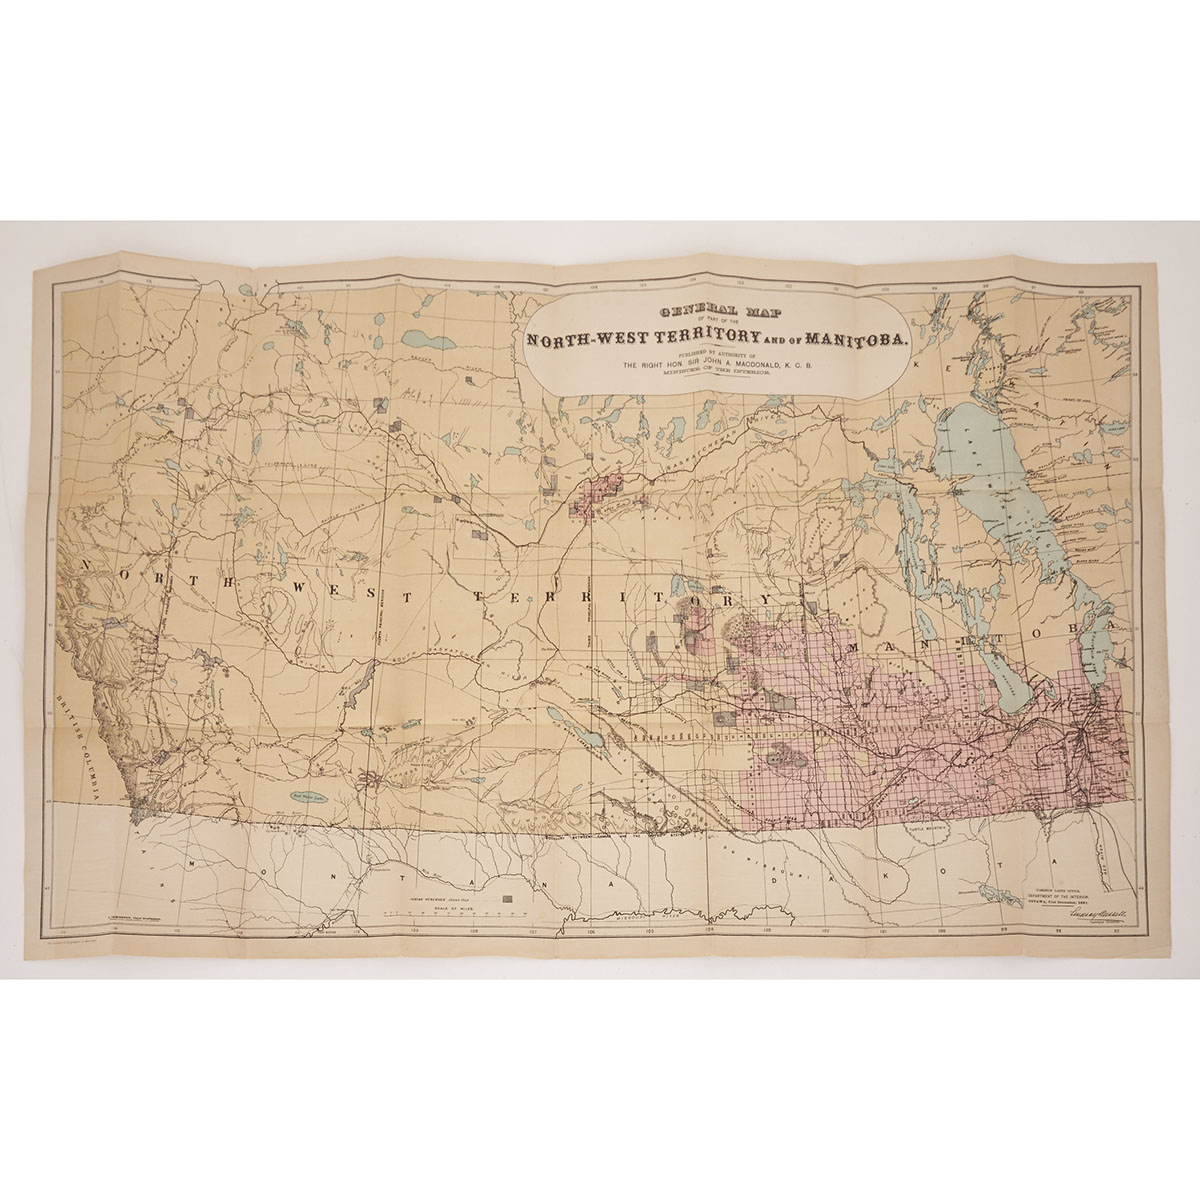 Two Canadian Linen Backed Maps: General Map of Part of the North-West Territory and of Manitoba, and North-West Territory Map Shewing Dominion Land Surveys Between West Boundary of Manitoba and Third Principal Meridian